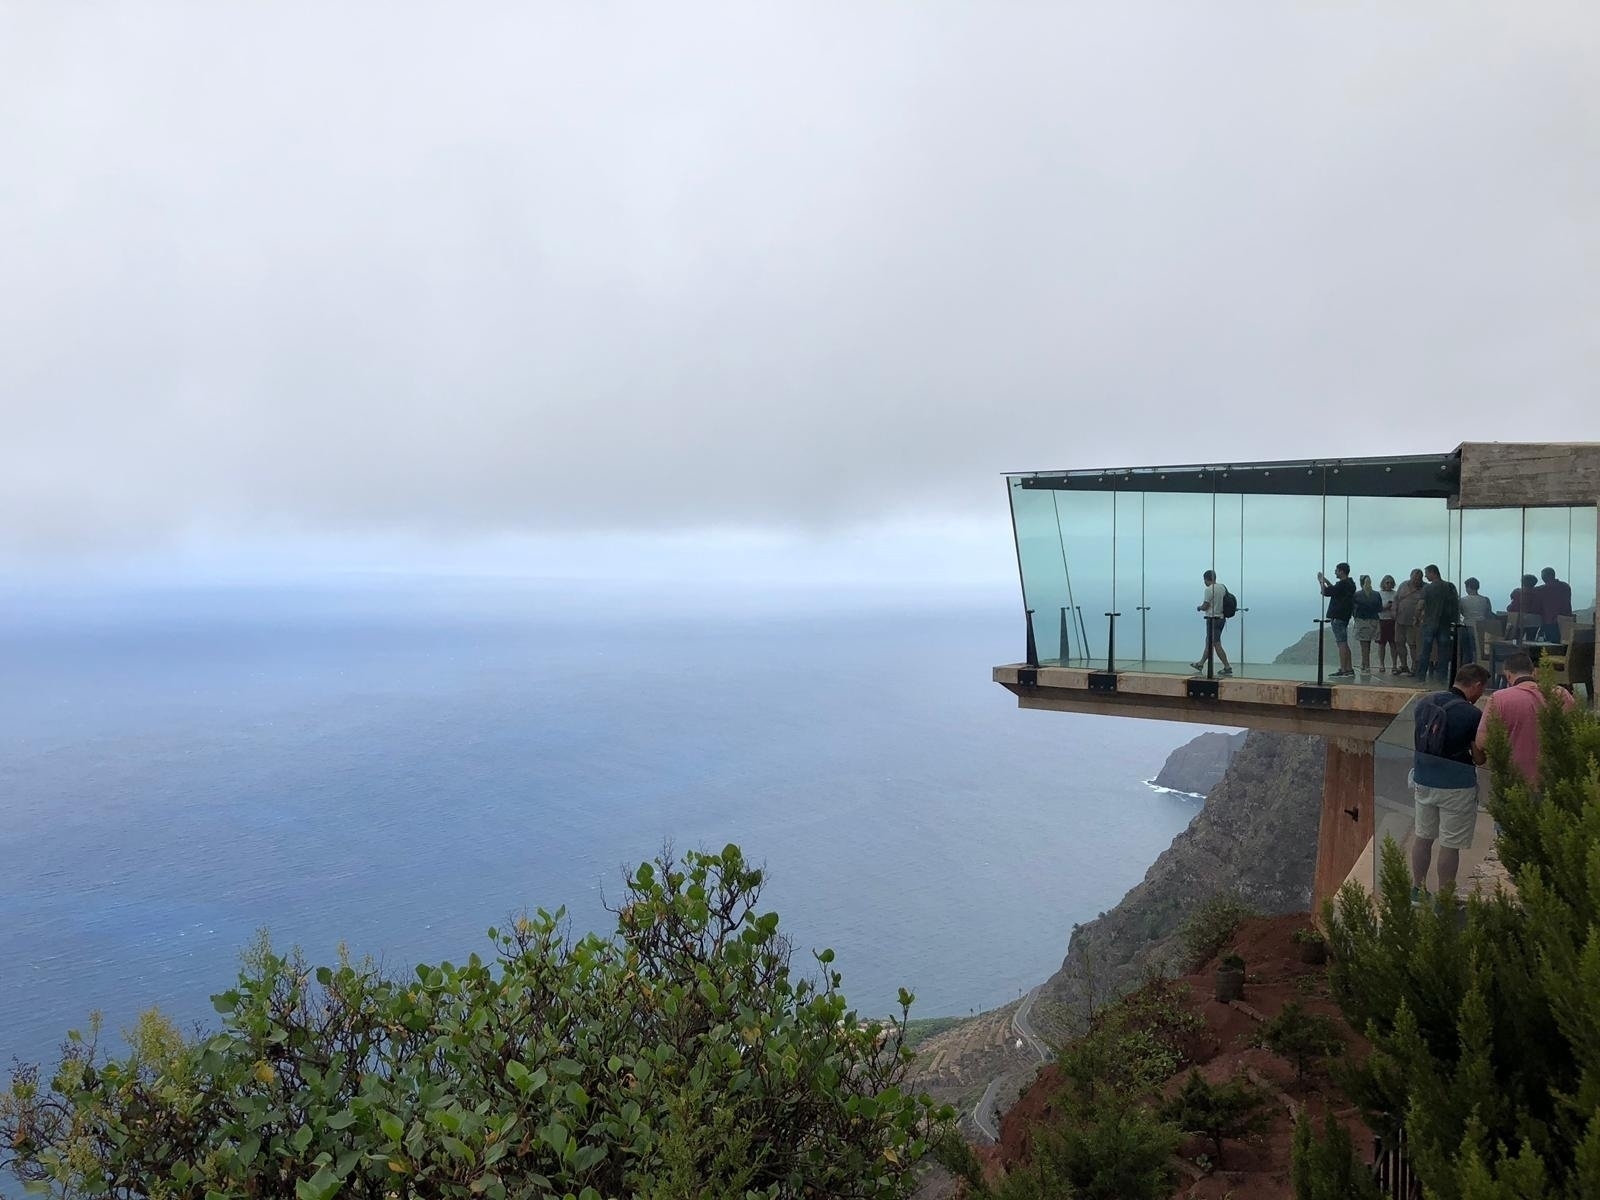 Glass viewing platform hanging over the edge of a cliff.